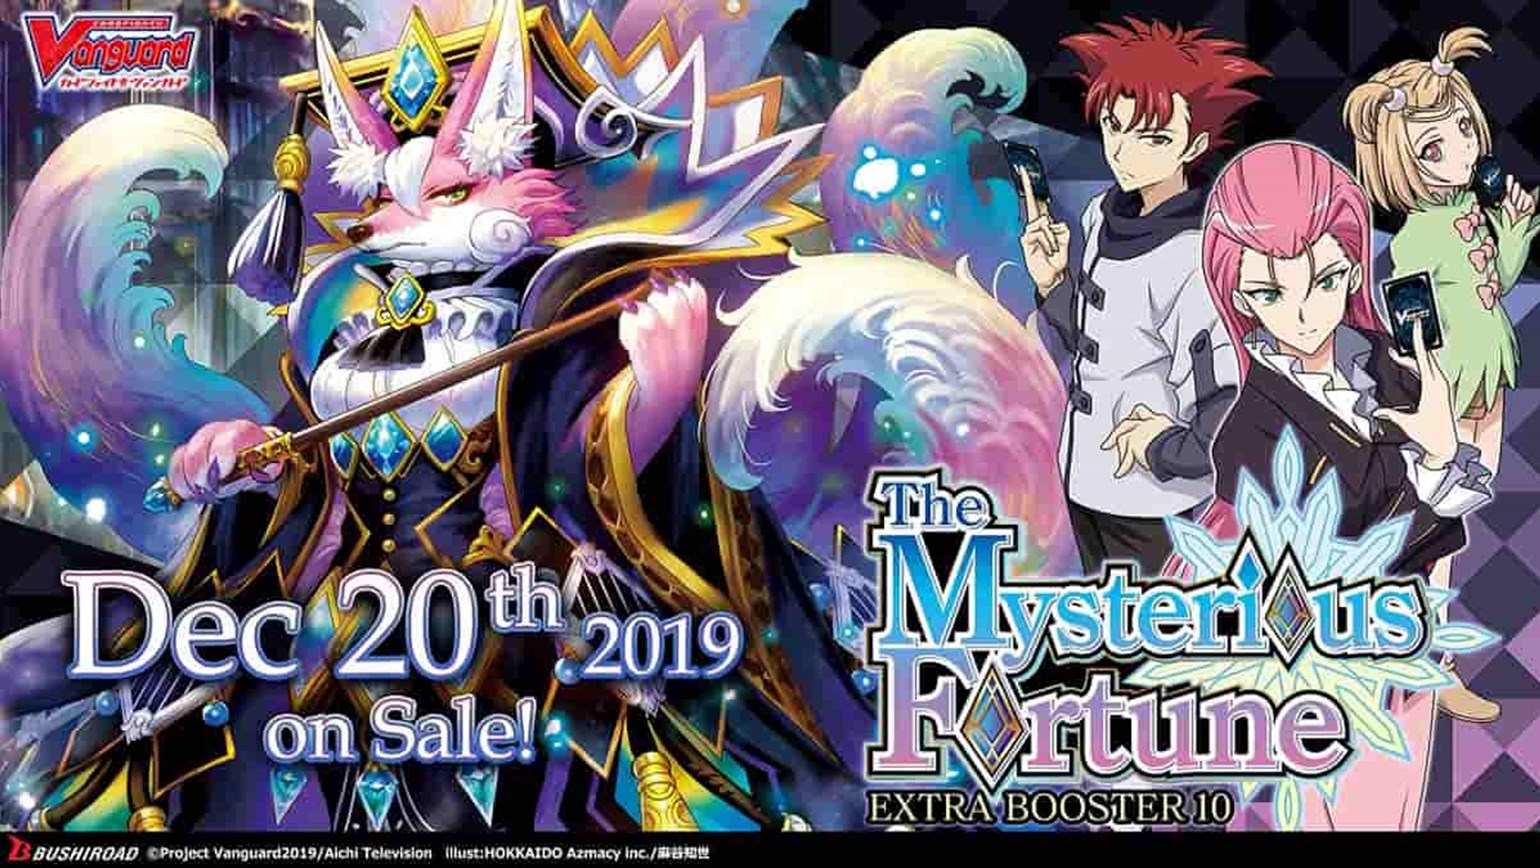 English Edition Cardfight!! Vanguard Extra Booster 10: The Mysterious Fortune Coming December 20th